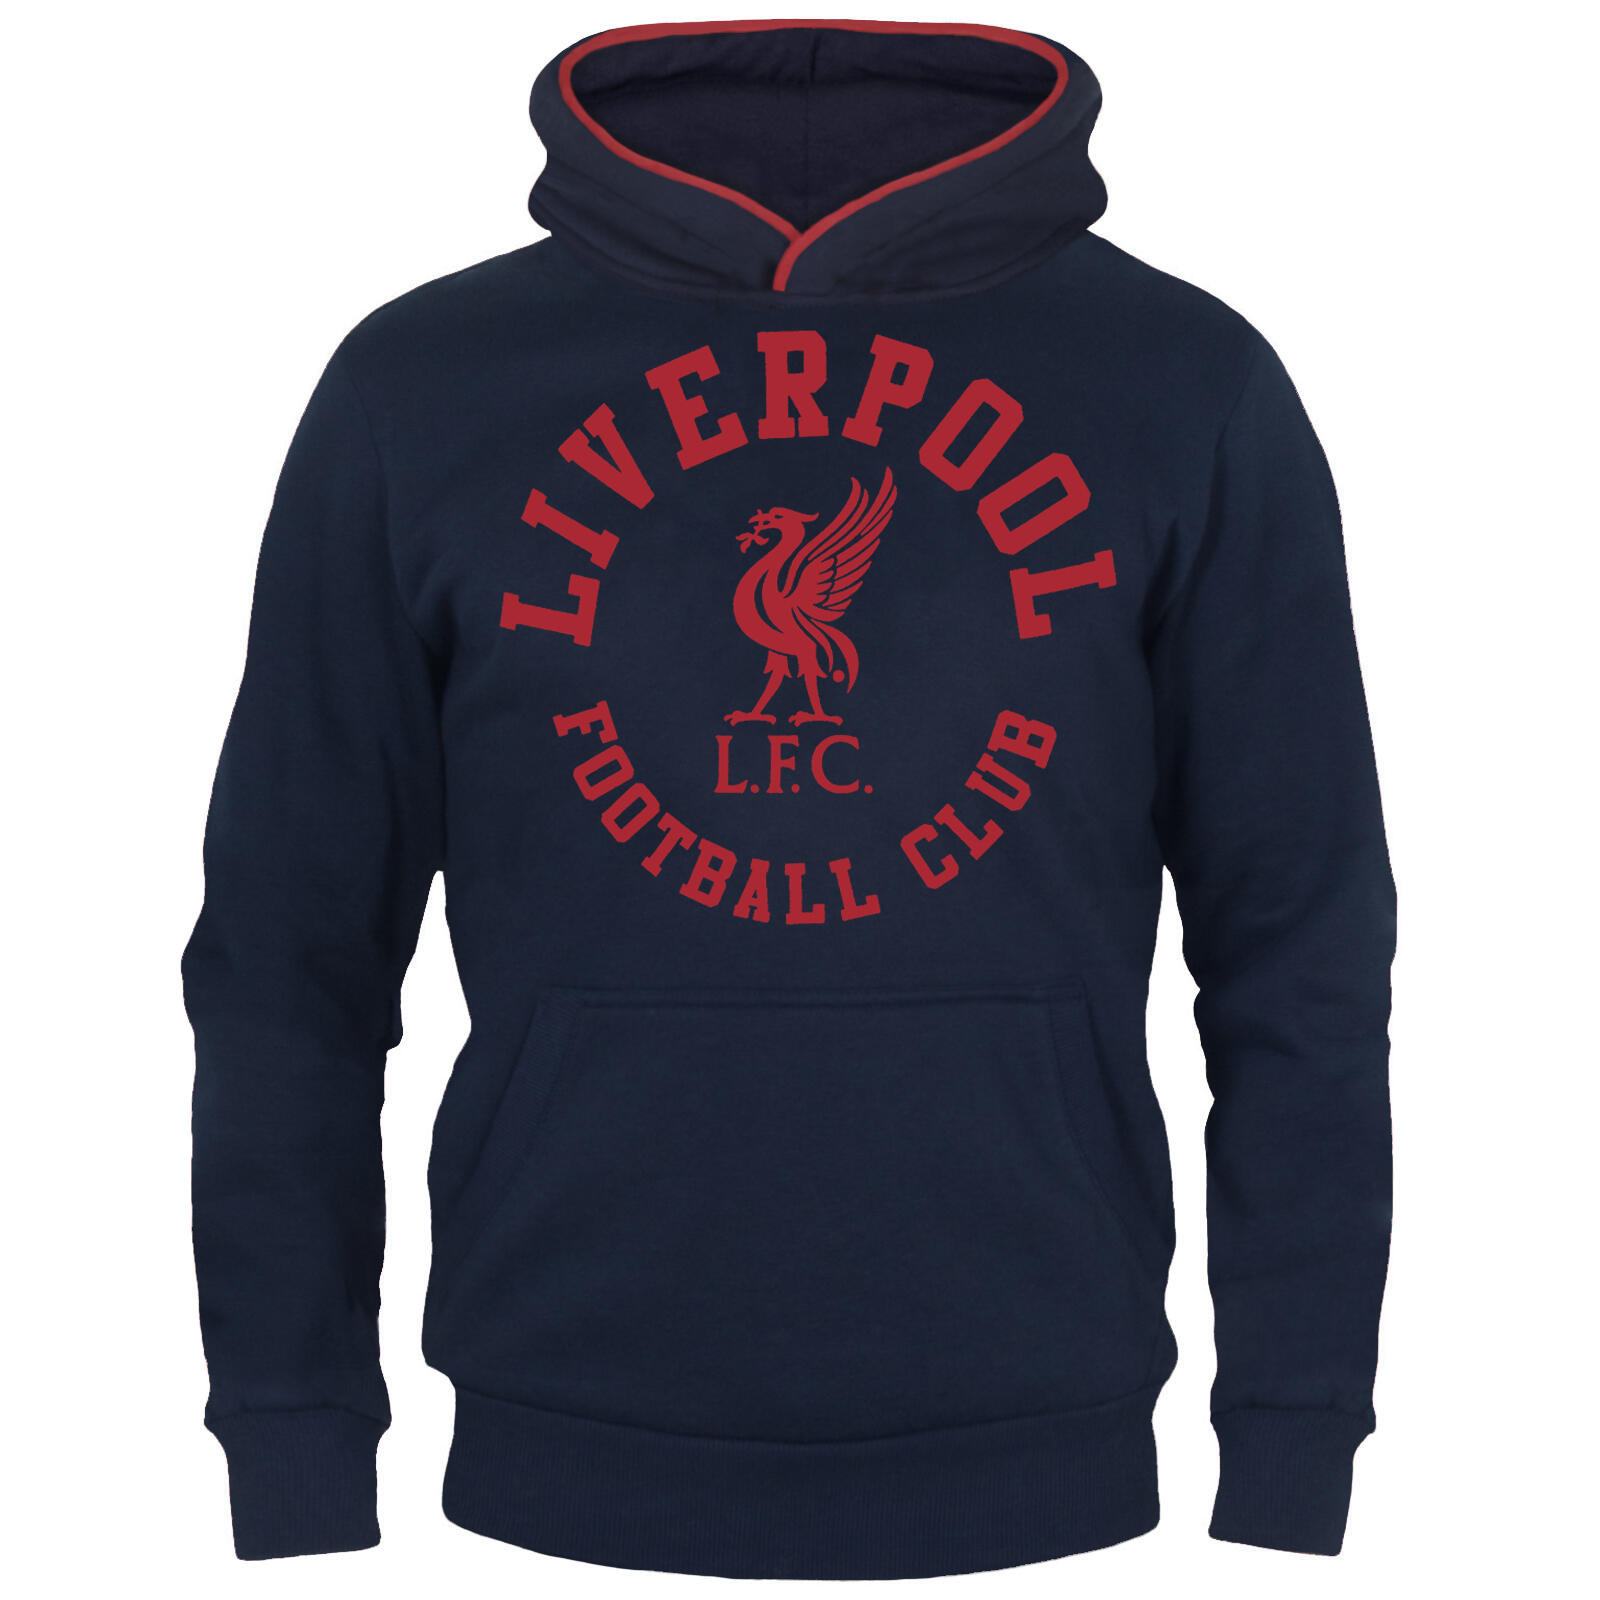 LIVERPOOL FC Liverpool FC Boys Hoody Fleece Graphic Kids OFFICIAL Football Gift